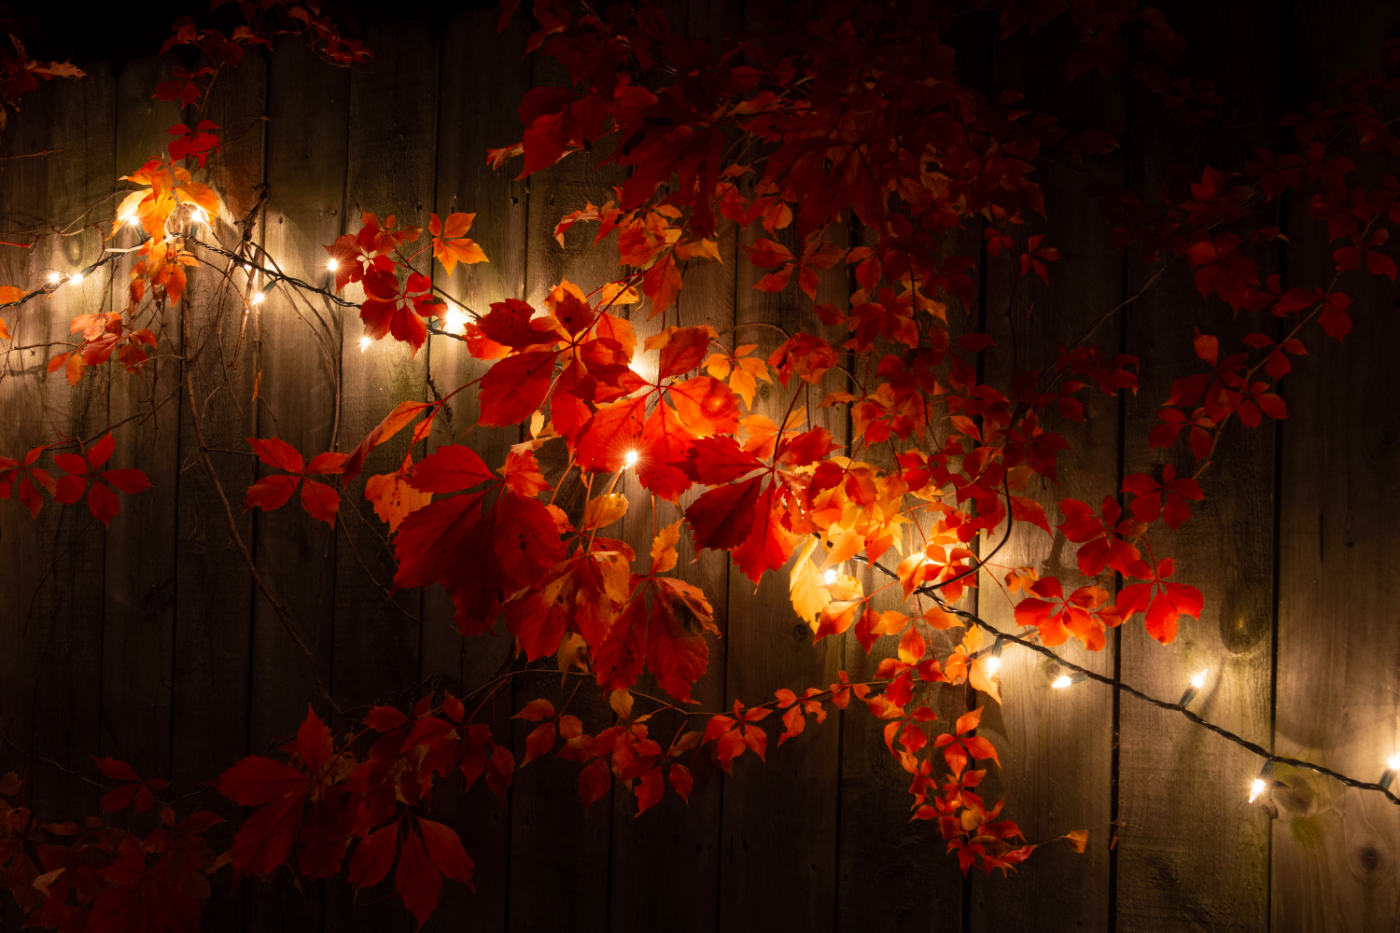 vines of red leaves backlit at night along a wooden fence